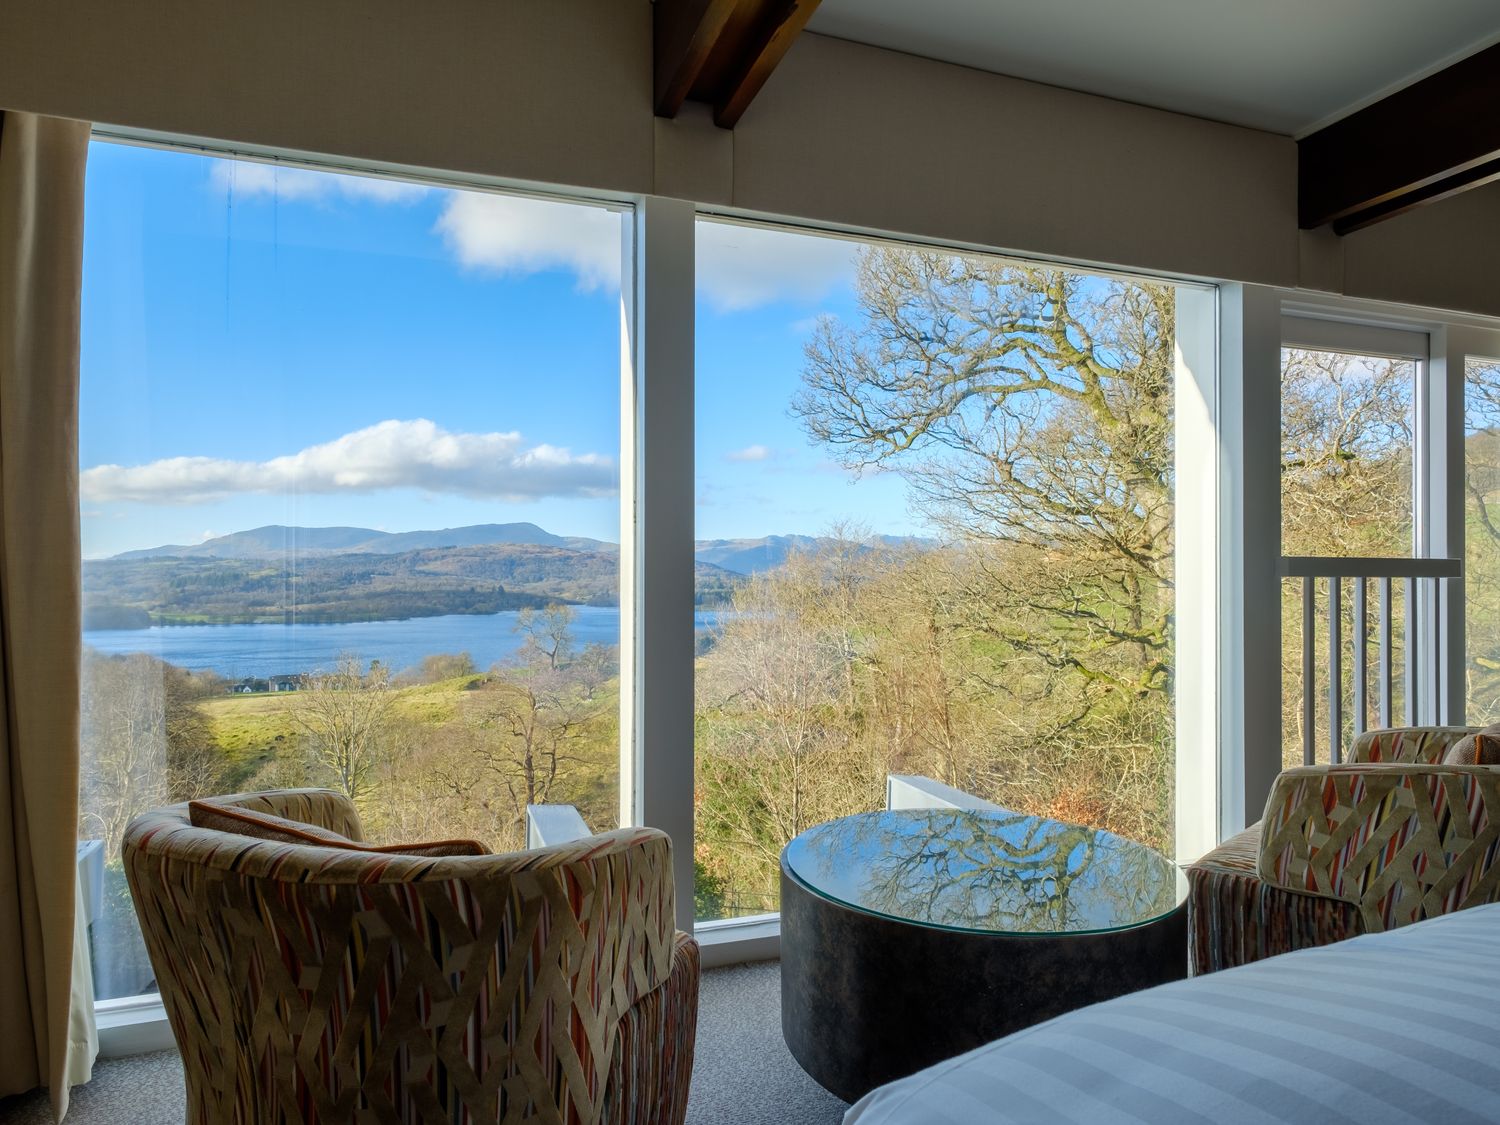 Paddock House, Ambleside, Lake District National Park. Views over Lake Windermere and mountain range